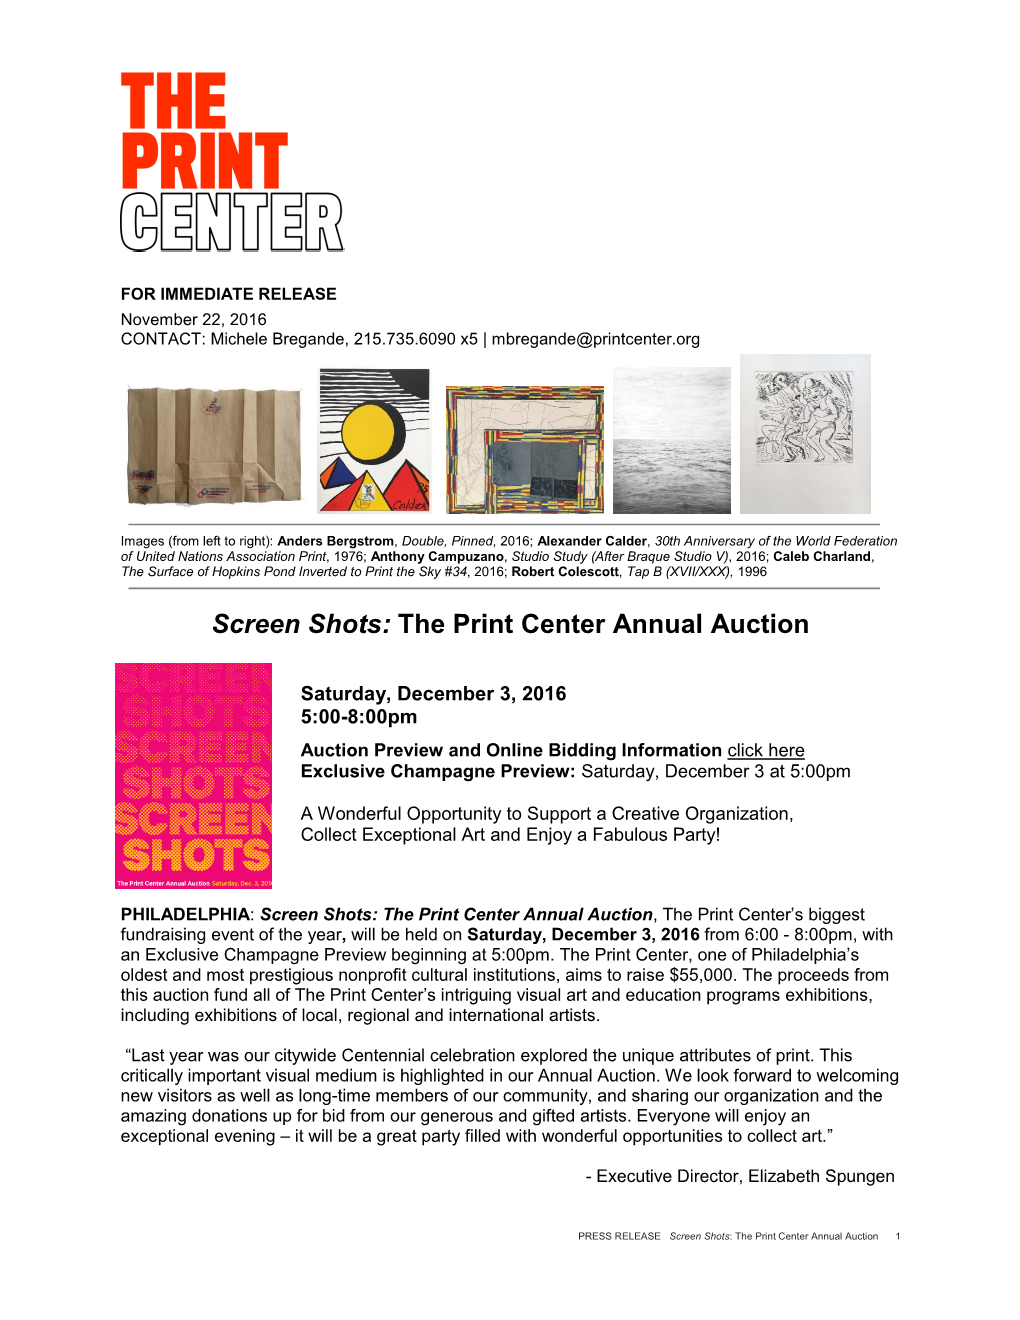 Screen Shots: the Print Center Annual Auction